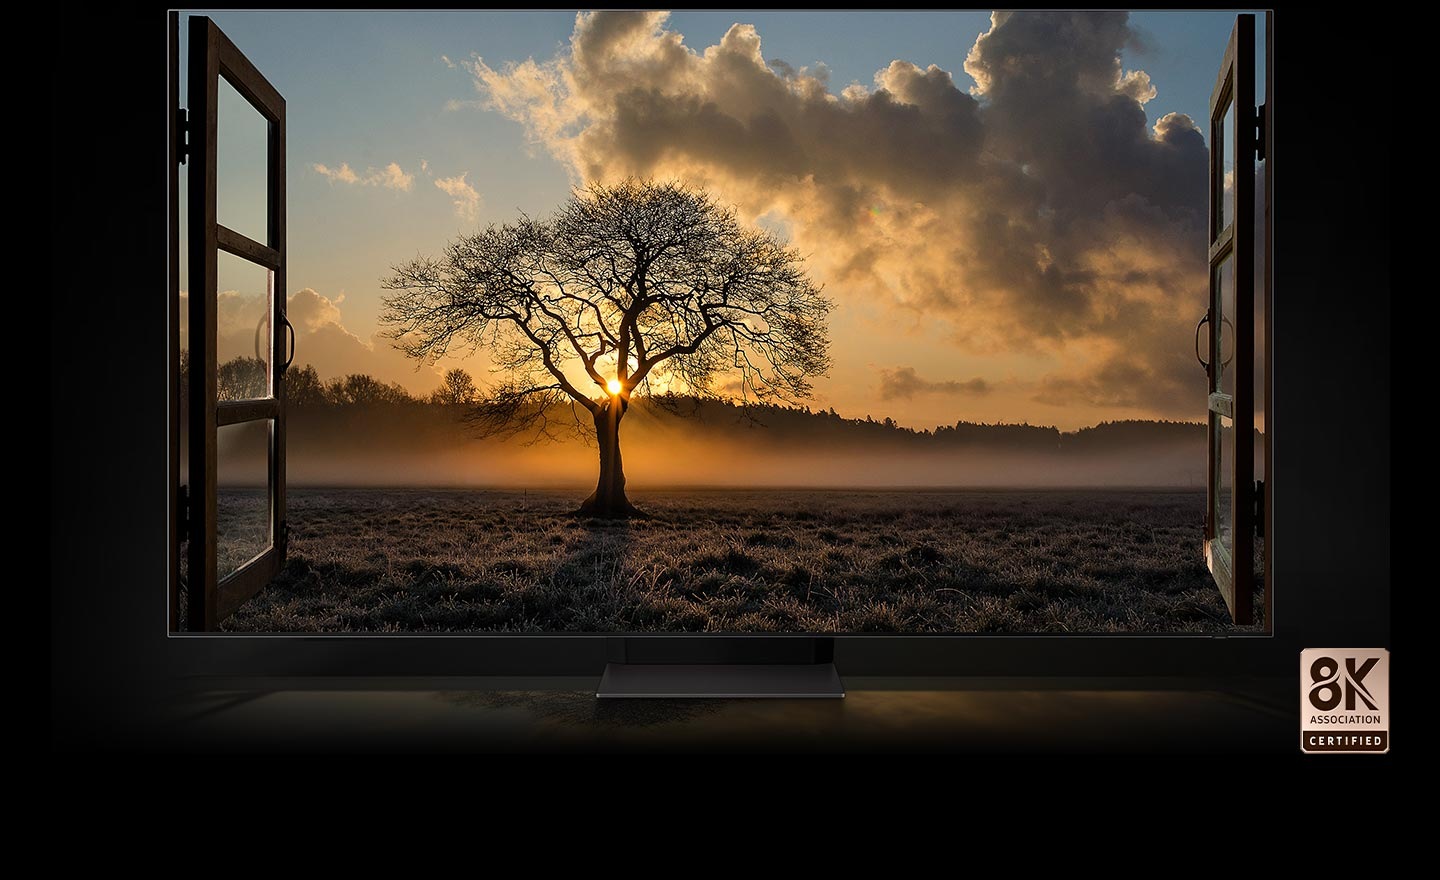 Contrast level of the sunset and a thin tree in a wide field as seen from inside a room is vivid. Neo QLED 8K TV is certified by the 8K Association.